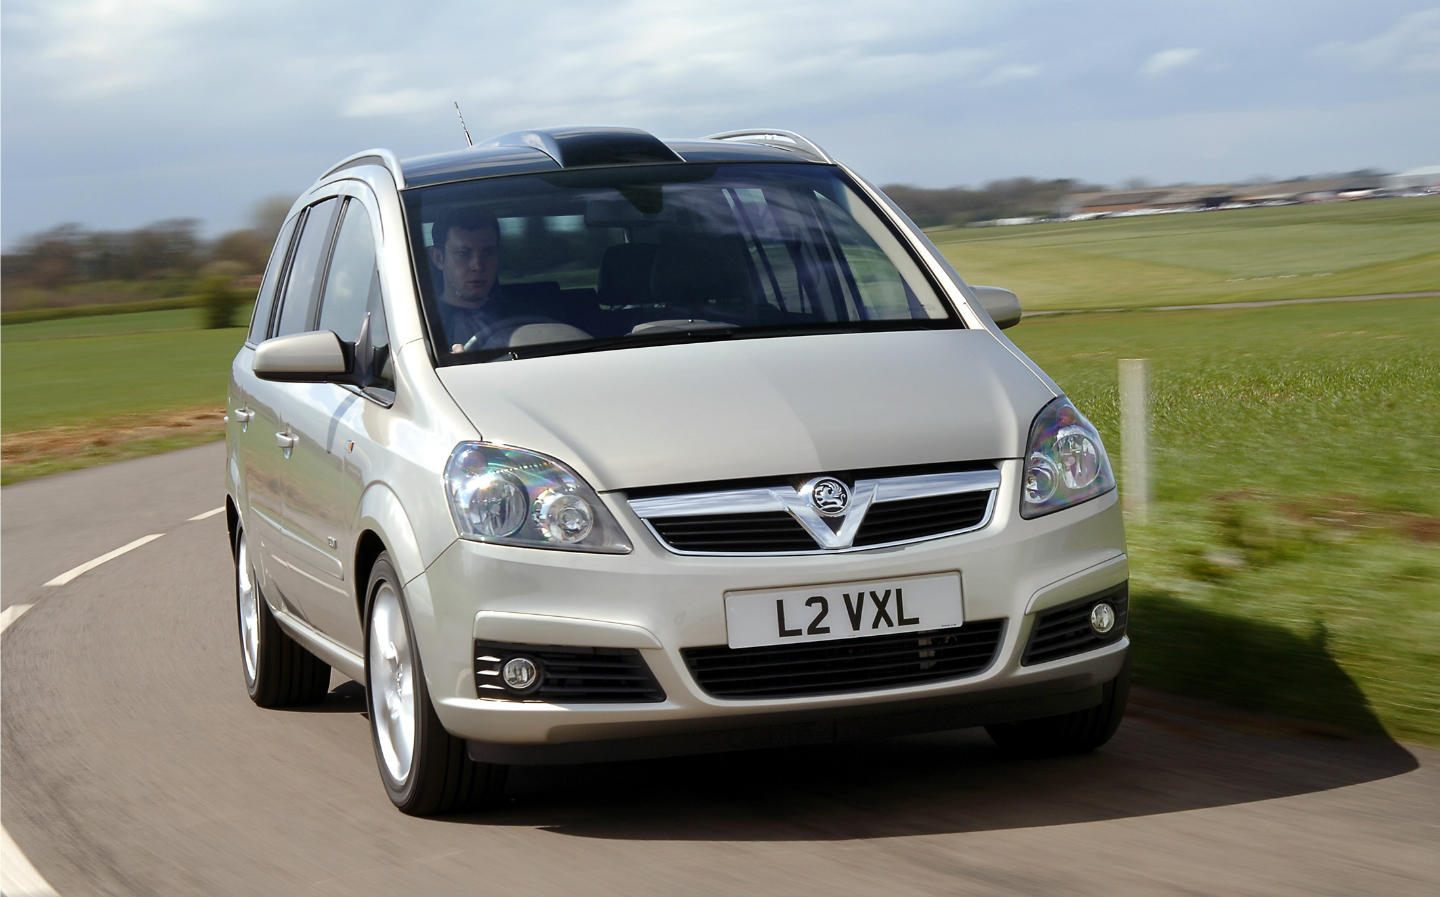 Vauxhall recalls Zafira people carrier for another potential fire issue